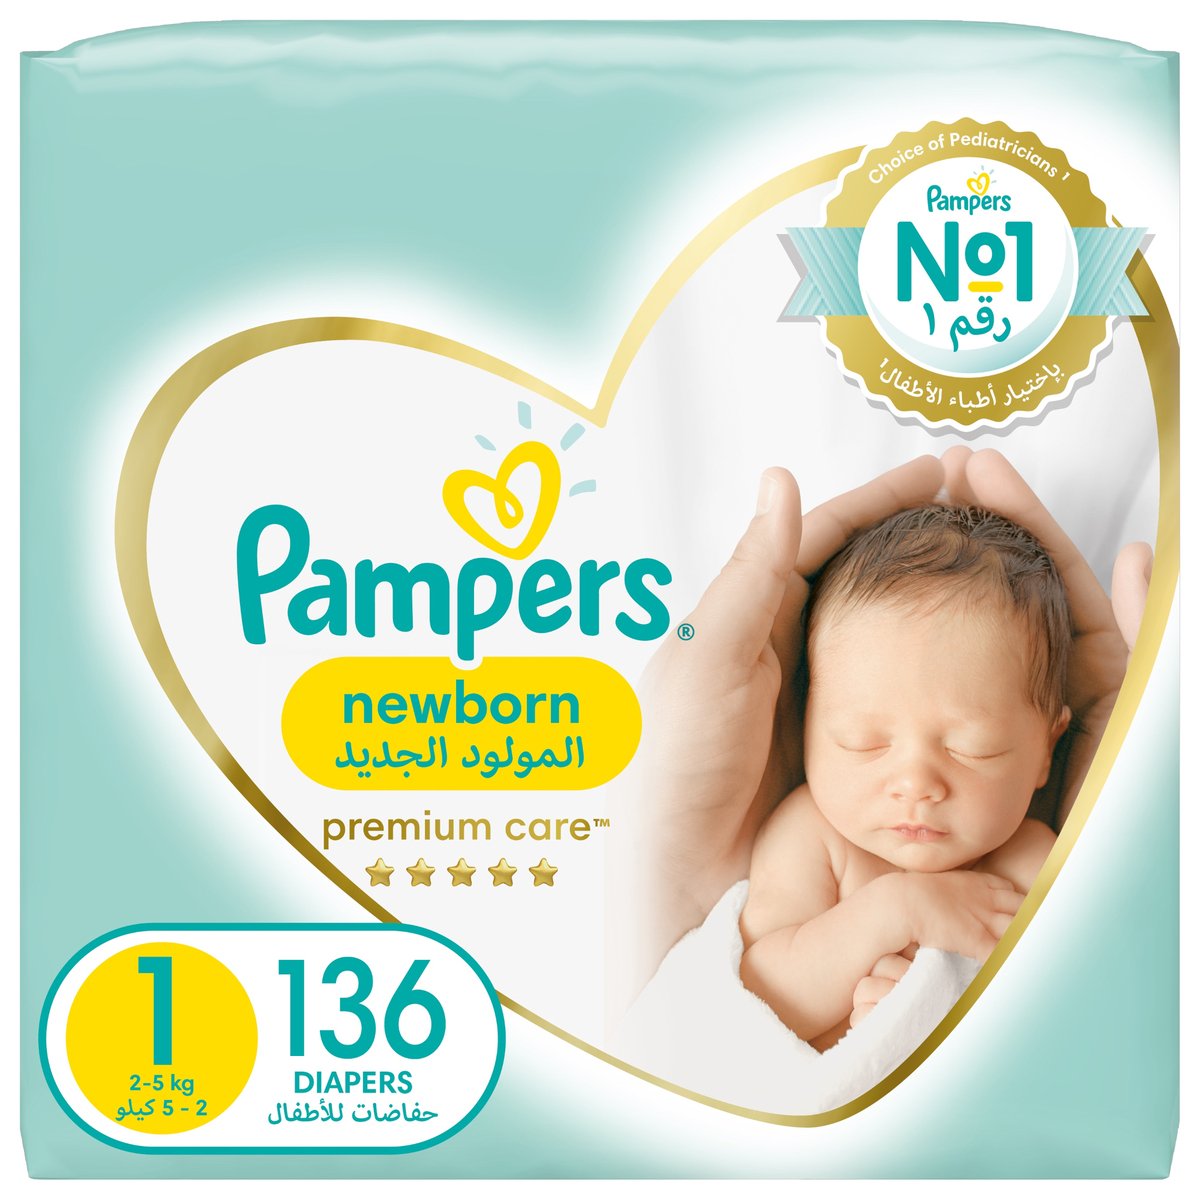 Pampers Premium Care Newborn Taped Diapers, Size 1, 2-5kg, Unique Softest Absorption for Ultimate Skin Protection, 136 pcs